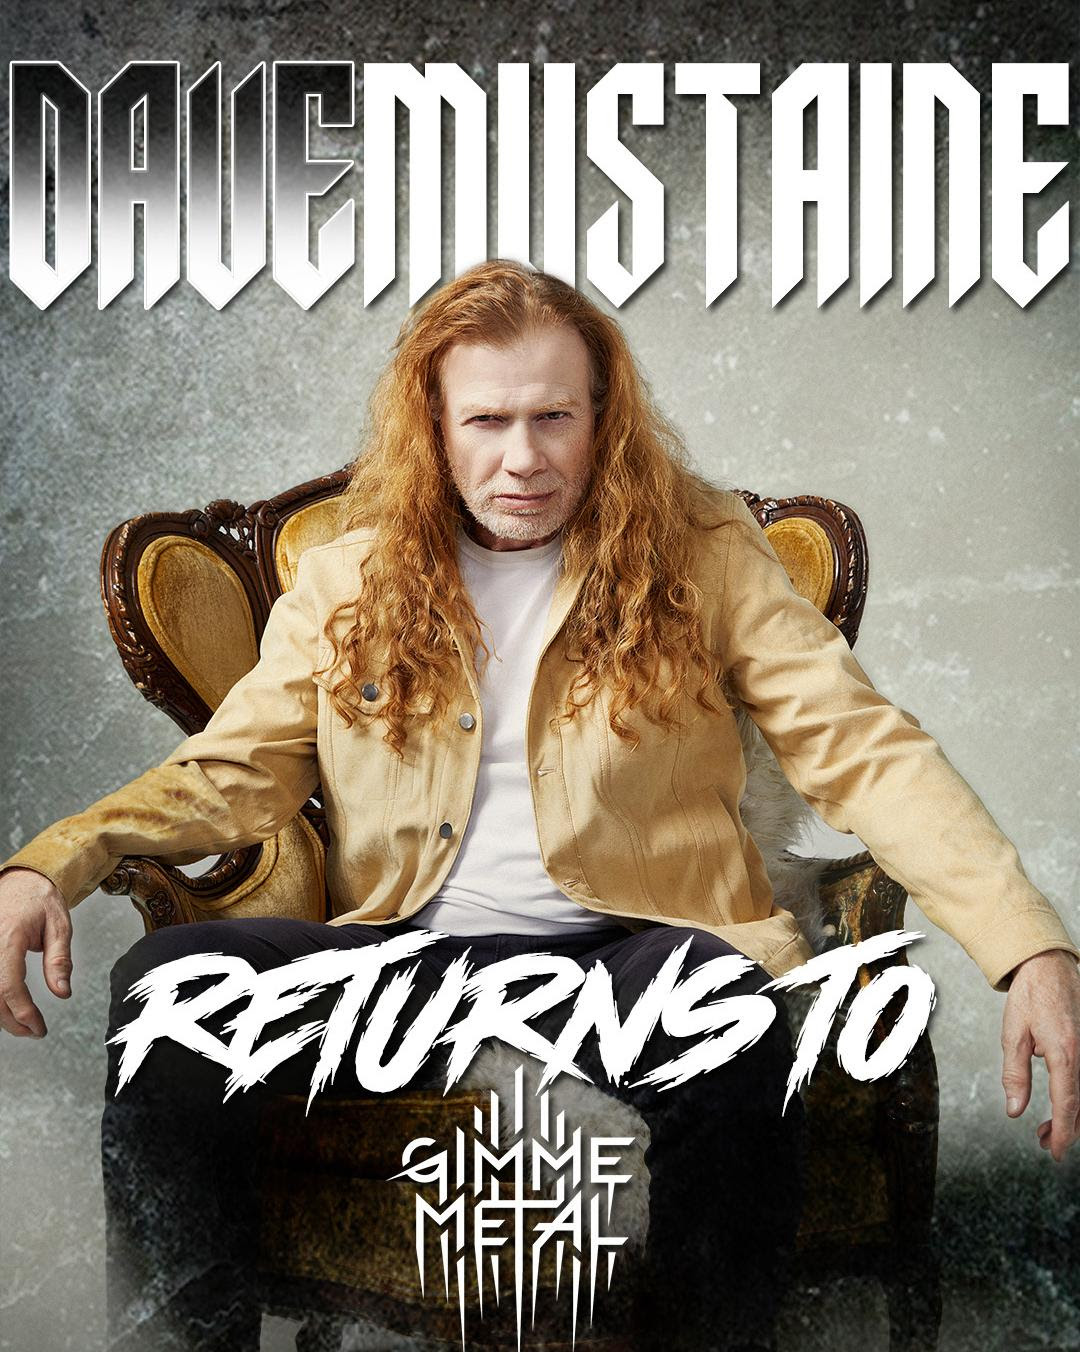 GIMME METAL: Megadeth’s Dave Mustaine Returns Each Thursday To Host His Hugely Popular The Dave Mustaine Show; New Episode To Air August 25th